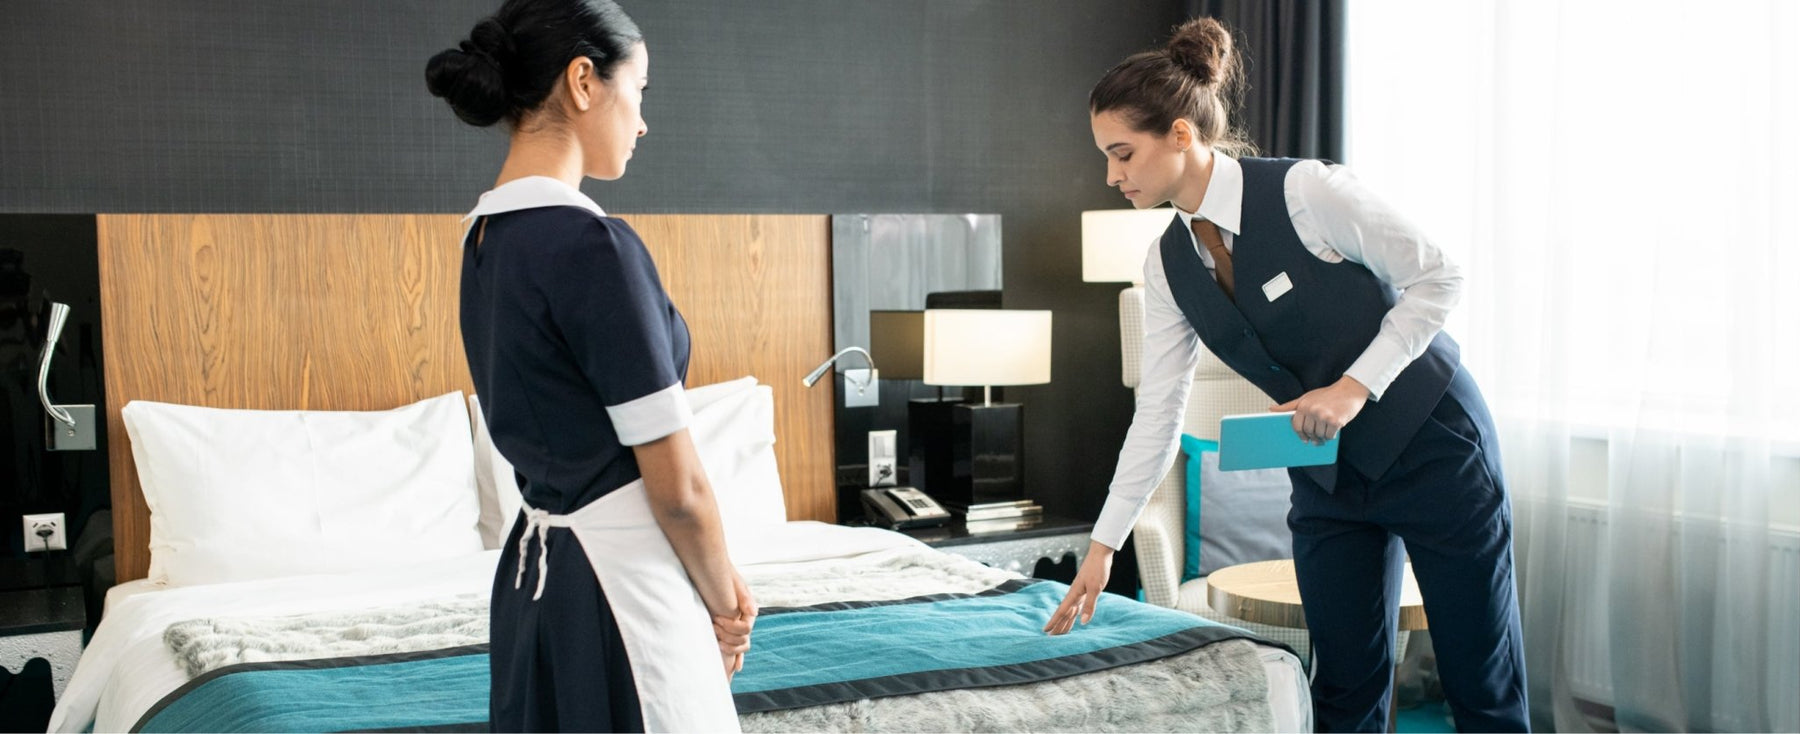 Comprehensive List of Hotel Cleaning Chemicals: A Guide for Housekeeping Managers - Unilever Professional India